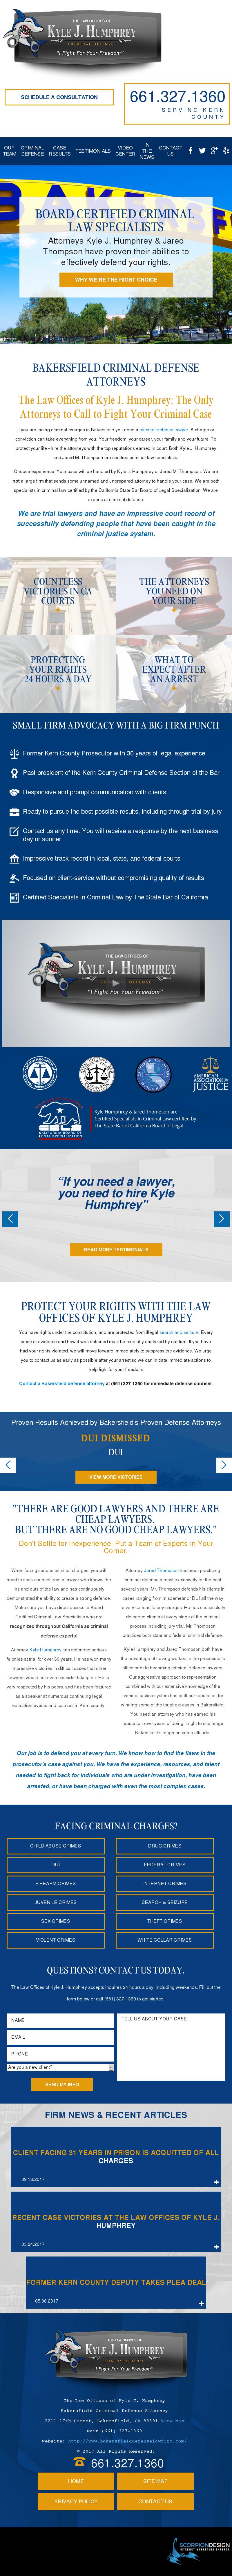 Humphrey Kyle Attorney At Law - Bakersfield CA Lawyers